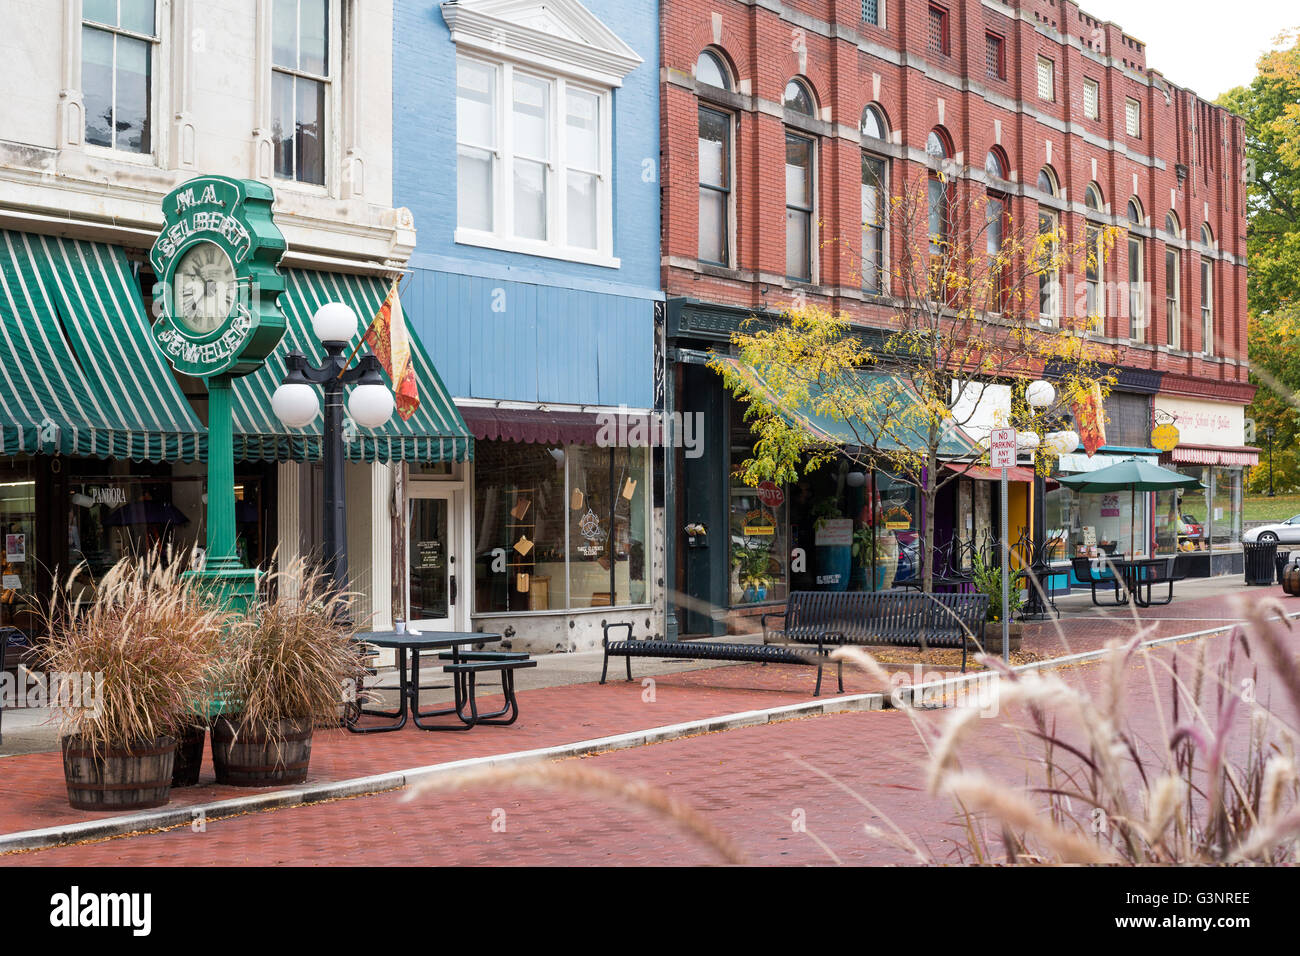 Street scene with old historic buildings and storefronts in downtown Frankfort, Kentucky, USA Stock Photo